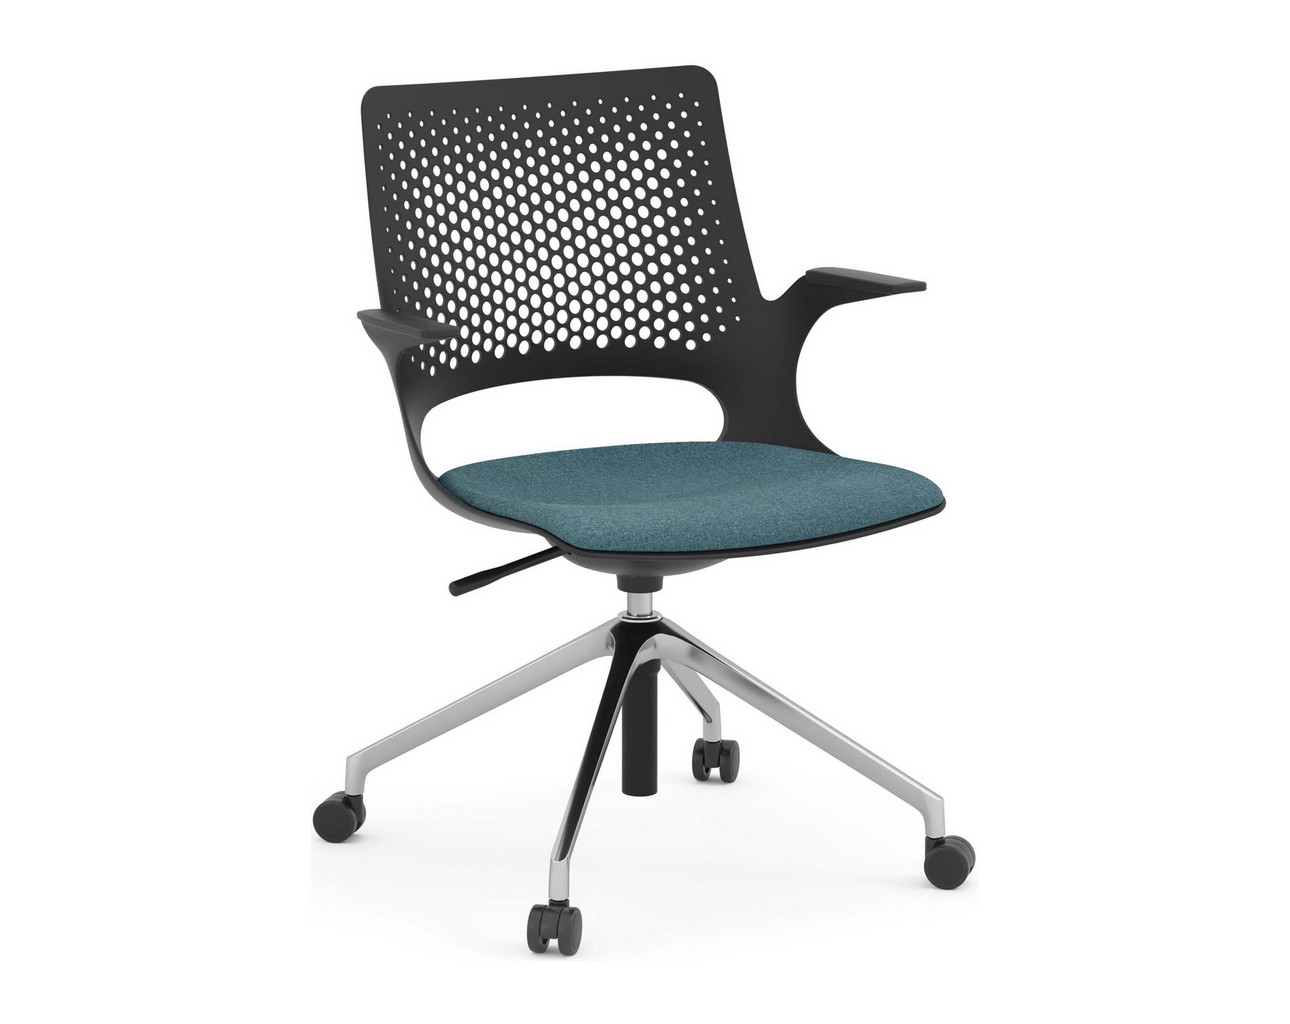 Harmony Multi-Purpose Chair – Polished Aluminum Base and Black Frame with Teal Seat